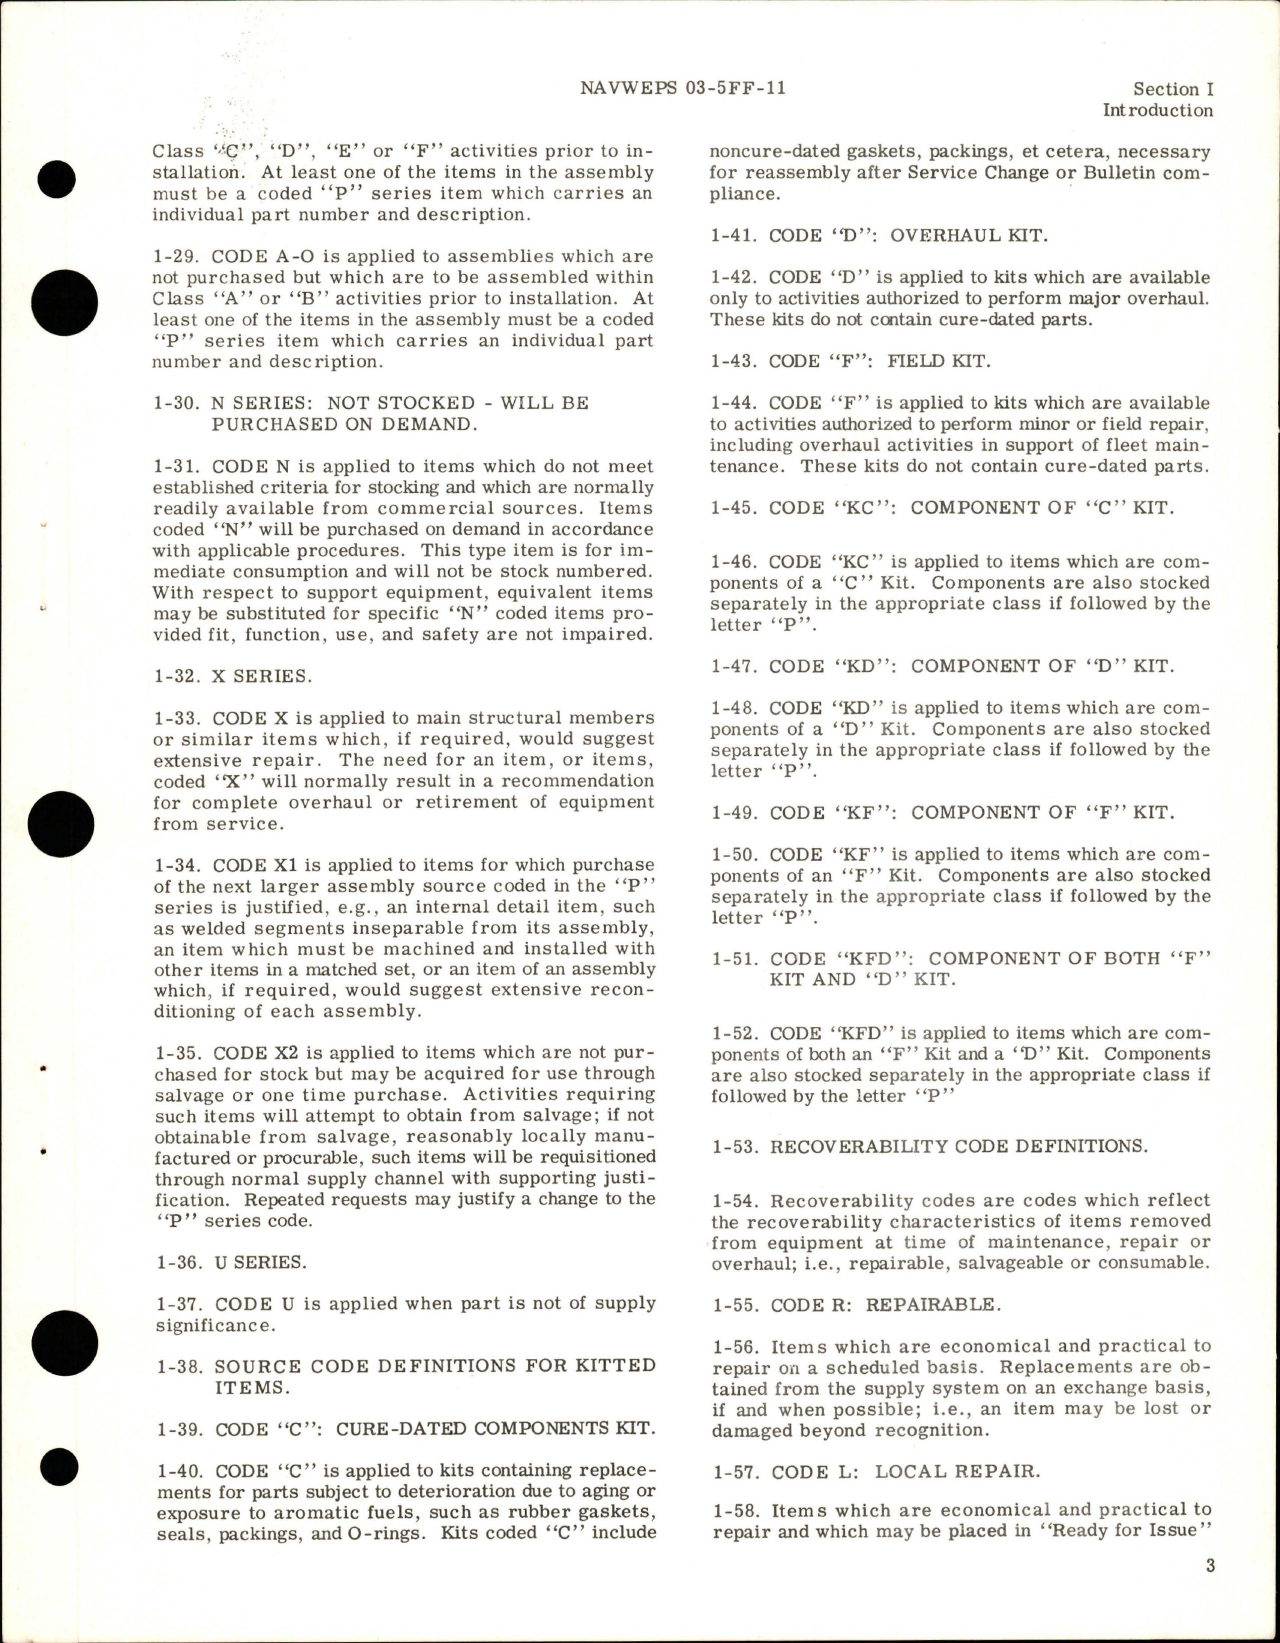 Sample page 5 from AirCorps Library document: Illustrated Parts Breakdown for Skid Control Box - Part 4833B